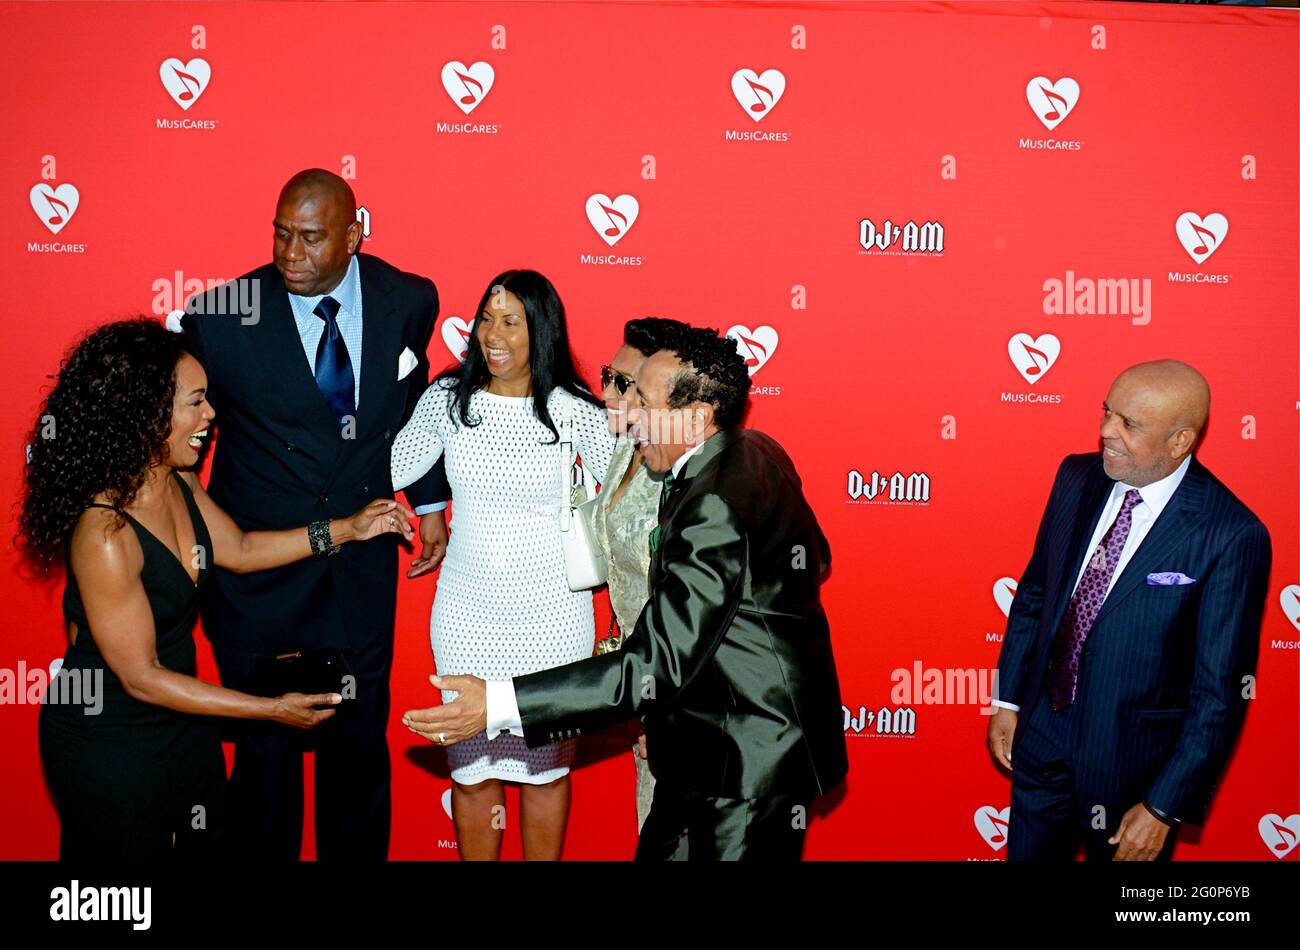 May 19, 2016, Los Angeles, California, USA: Angela Bassett, Magic Johnson, Earlitha Kelly, Frances Glandney, Smokey Robinson and Barry Gordy attend the 12th Annual MusiCares MAP Fund Tribute Concert. (Credit Image: © Billy Bennight/ZUMA Wire) Stock Photo